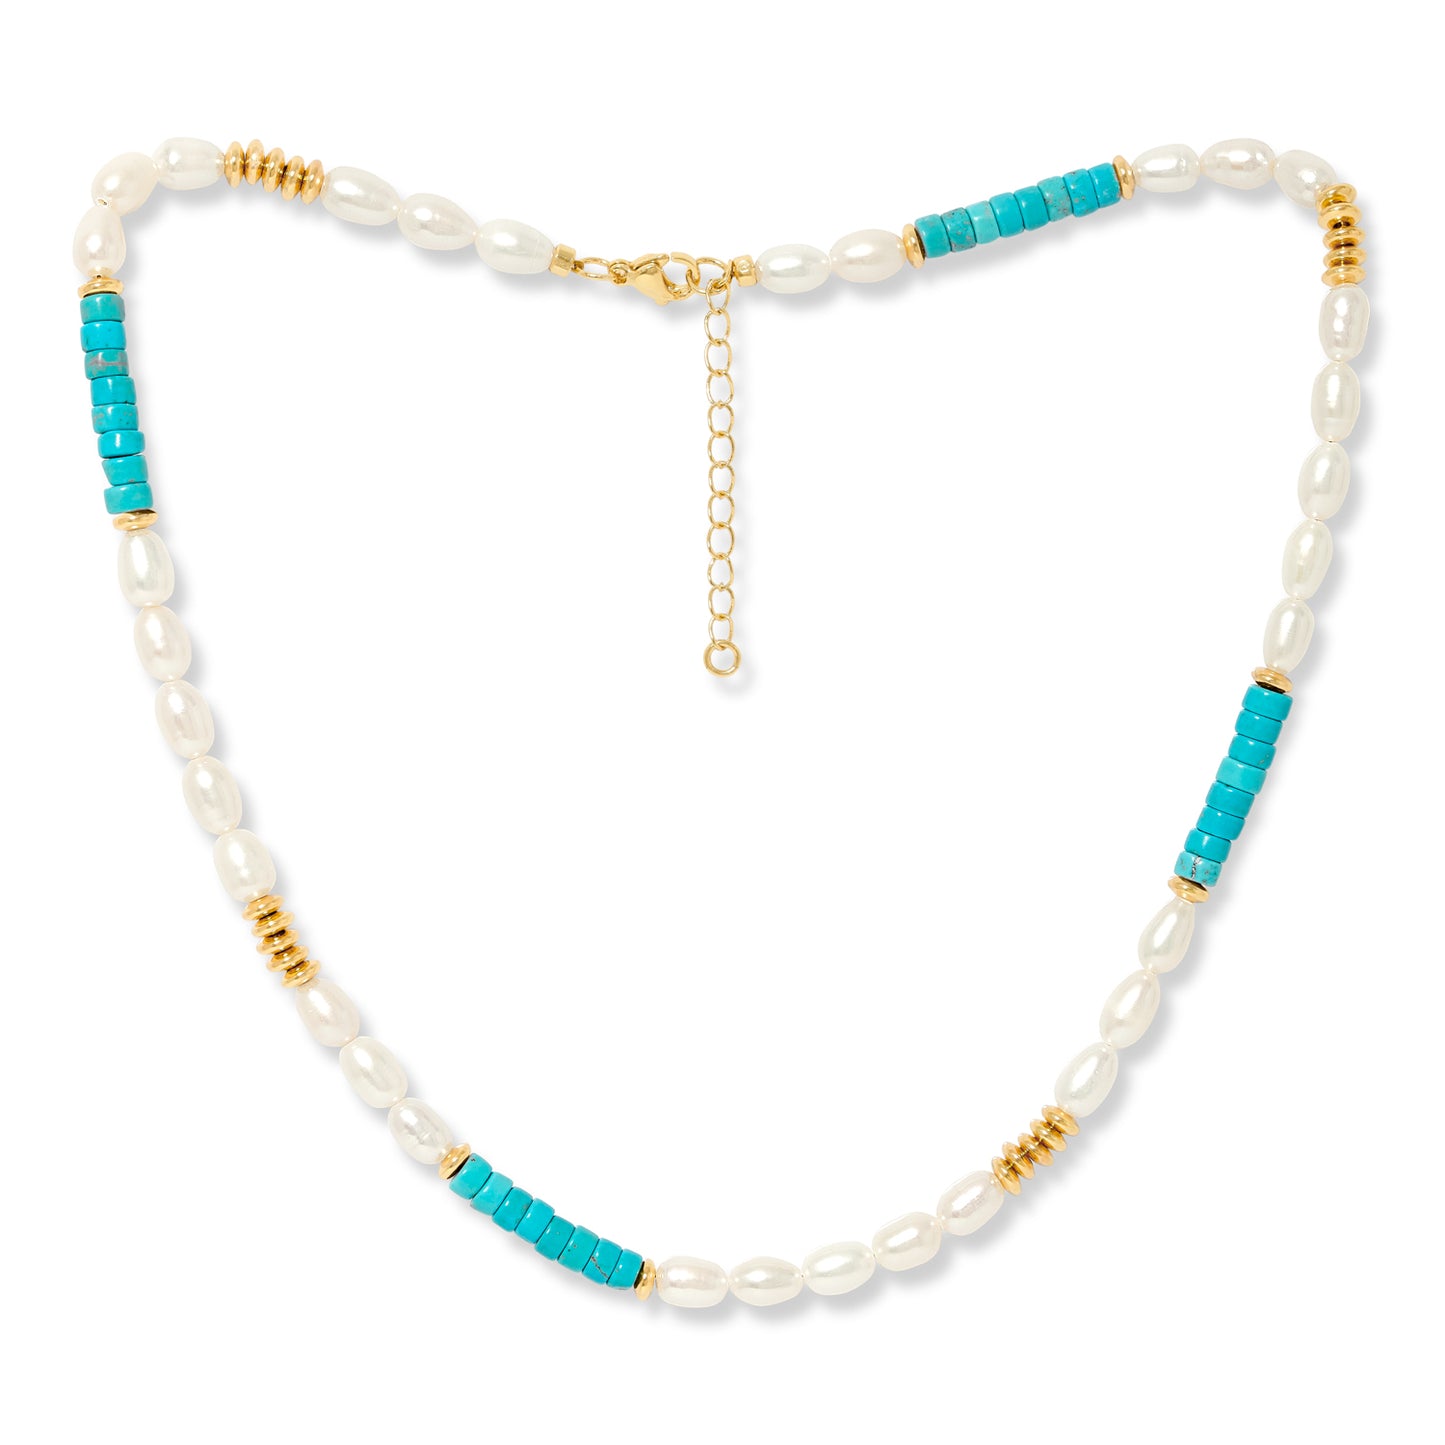 Nova oval cultured freshwater pearl necklace with turquoise & gold beads